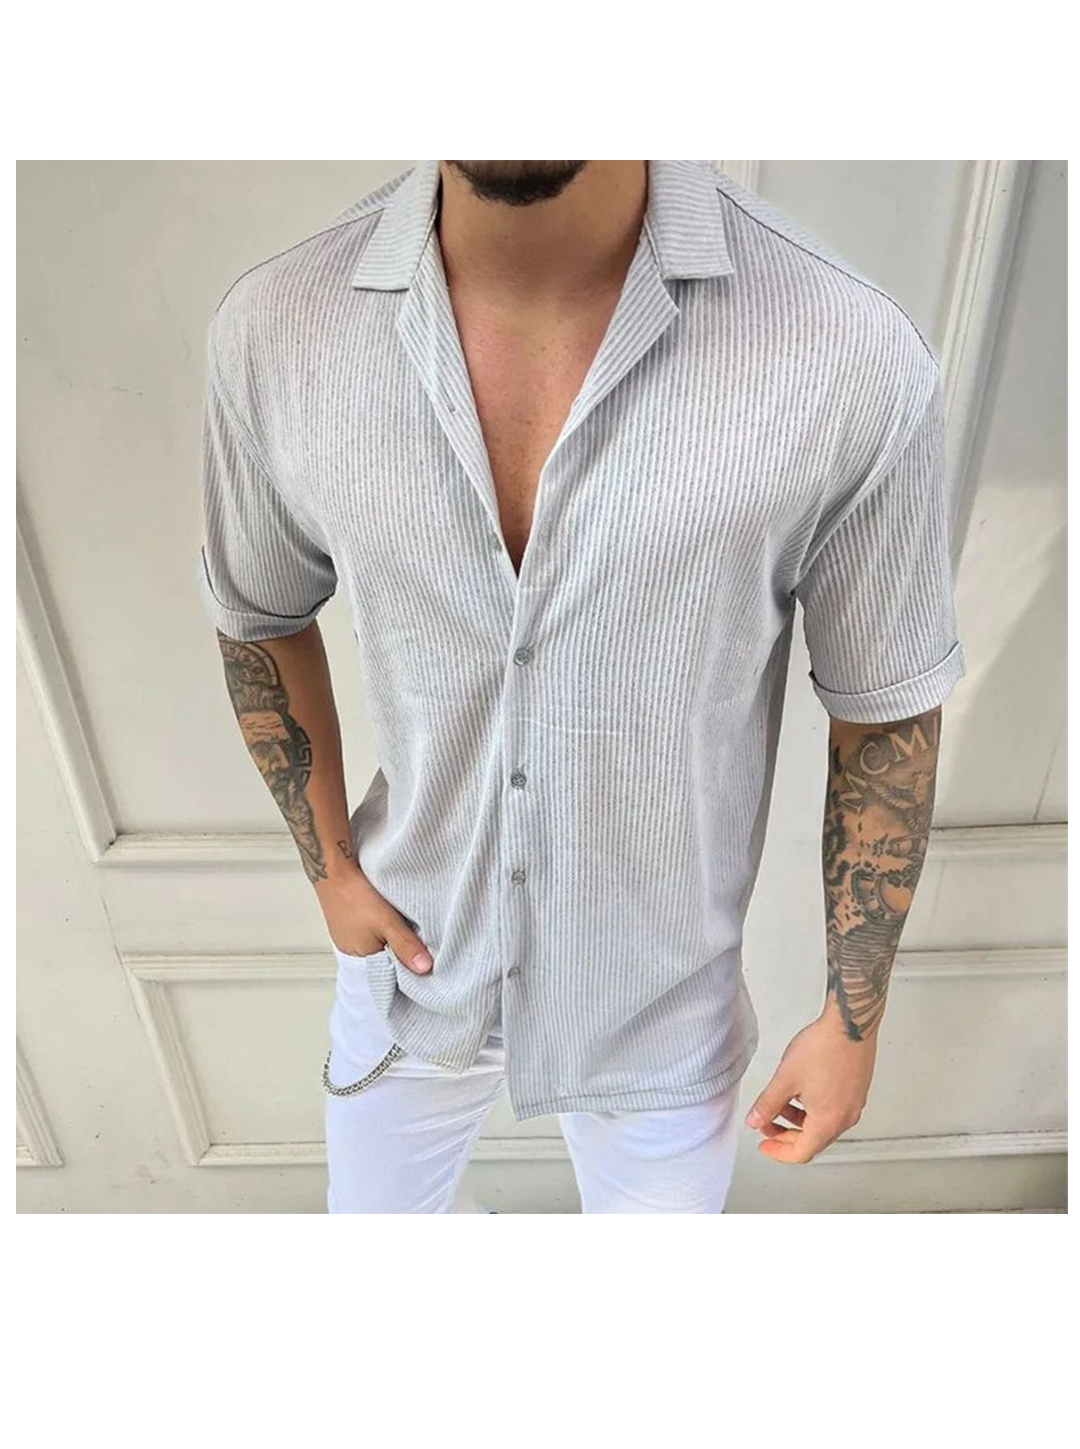 Posey Striped Textured Breathable Comfortable Short-sleeved Shirt